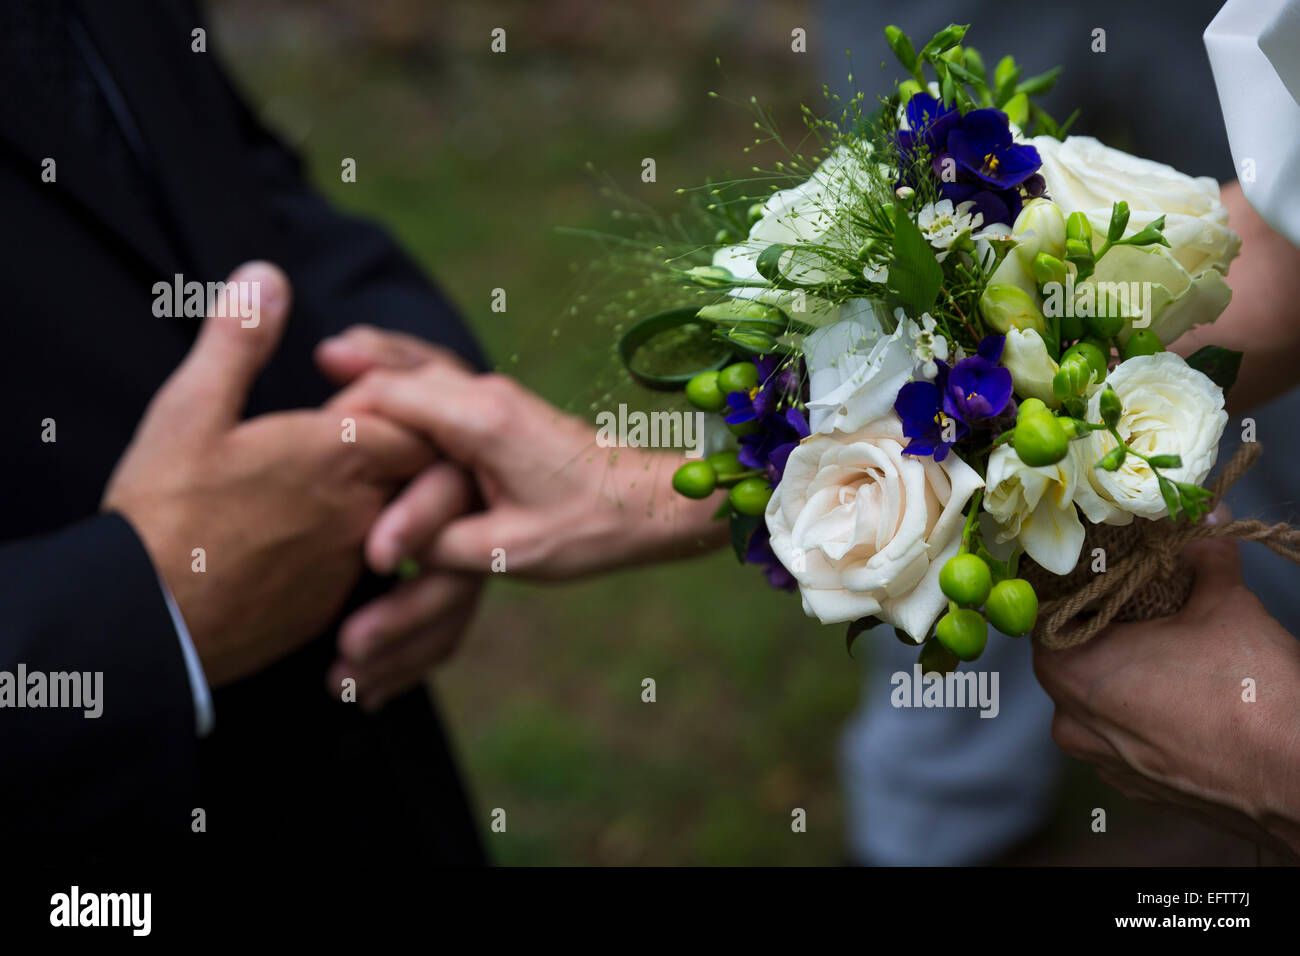 Newlyweds holding hands during the wedding ceremony Stock Photo